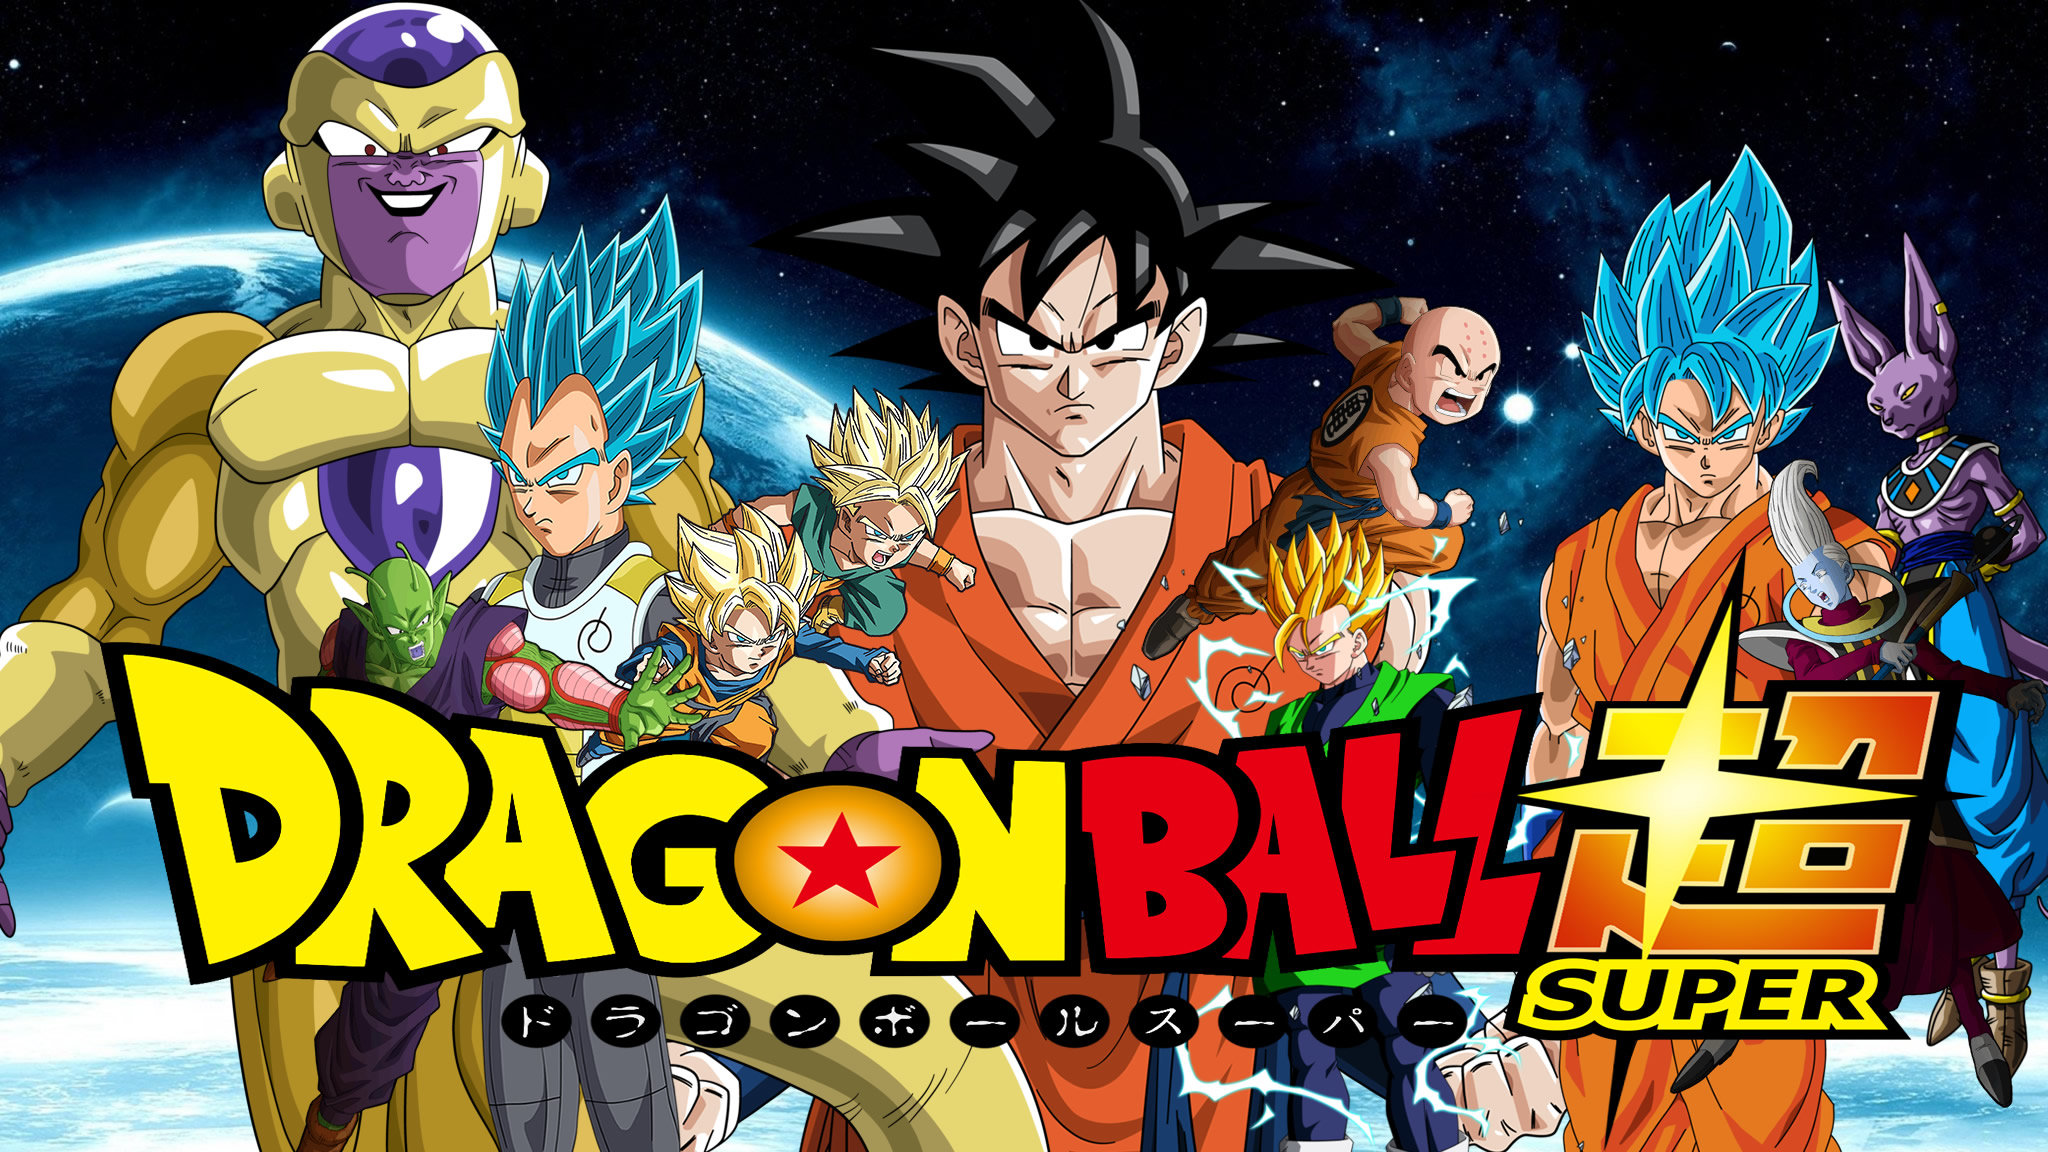 Download hd 2048x1152 Dragon Ball Super desktop background ID:242396 for free